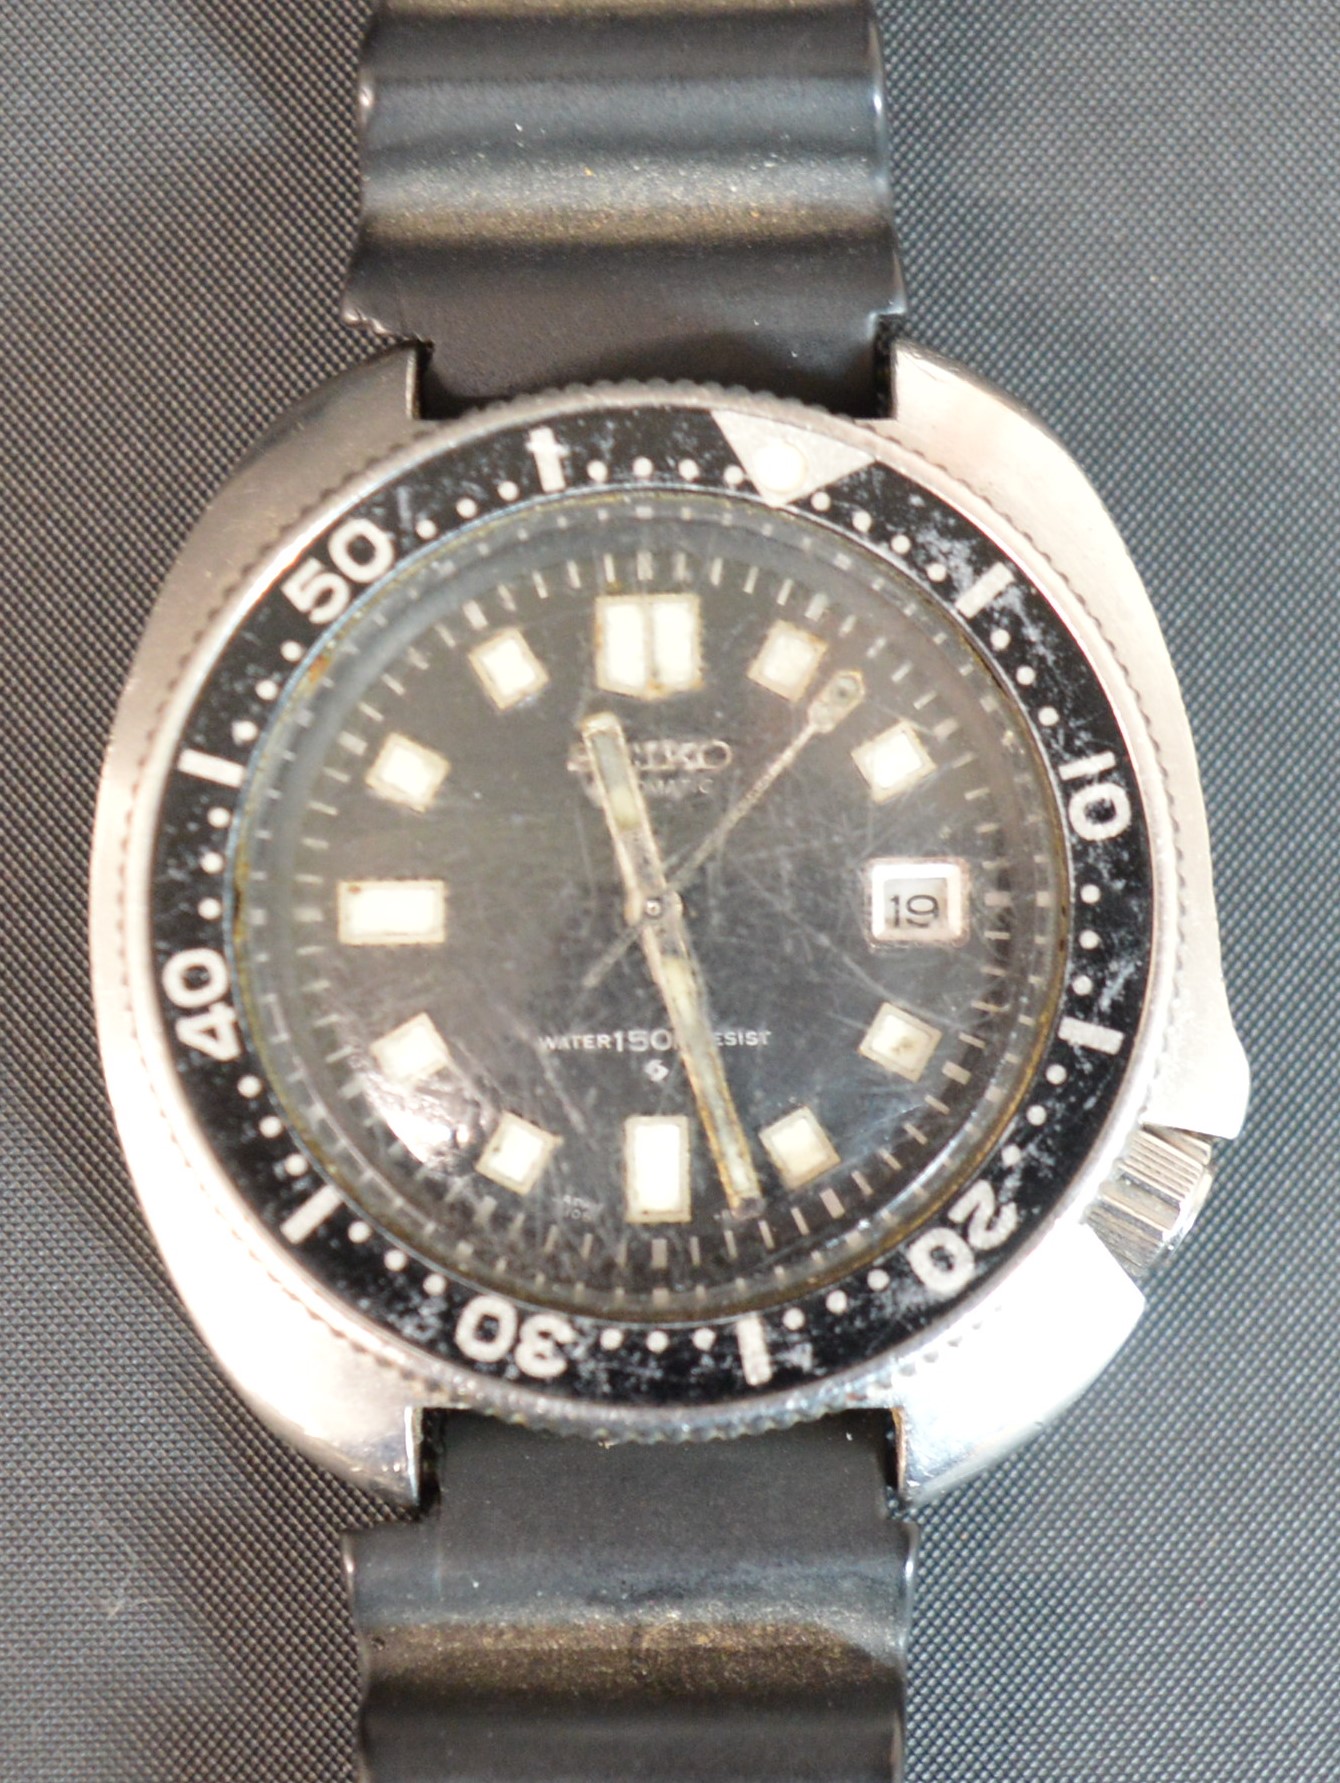 Seiko stainless steel automatic calendar centre seconds diver's wristwatch, signed Seiko, 150m - Image 2 of 5